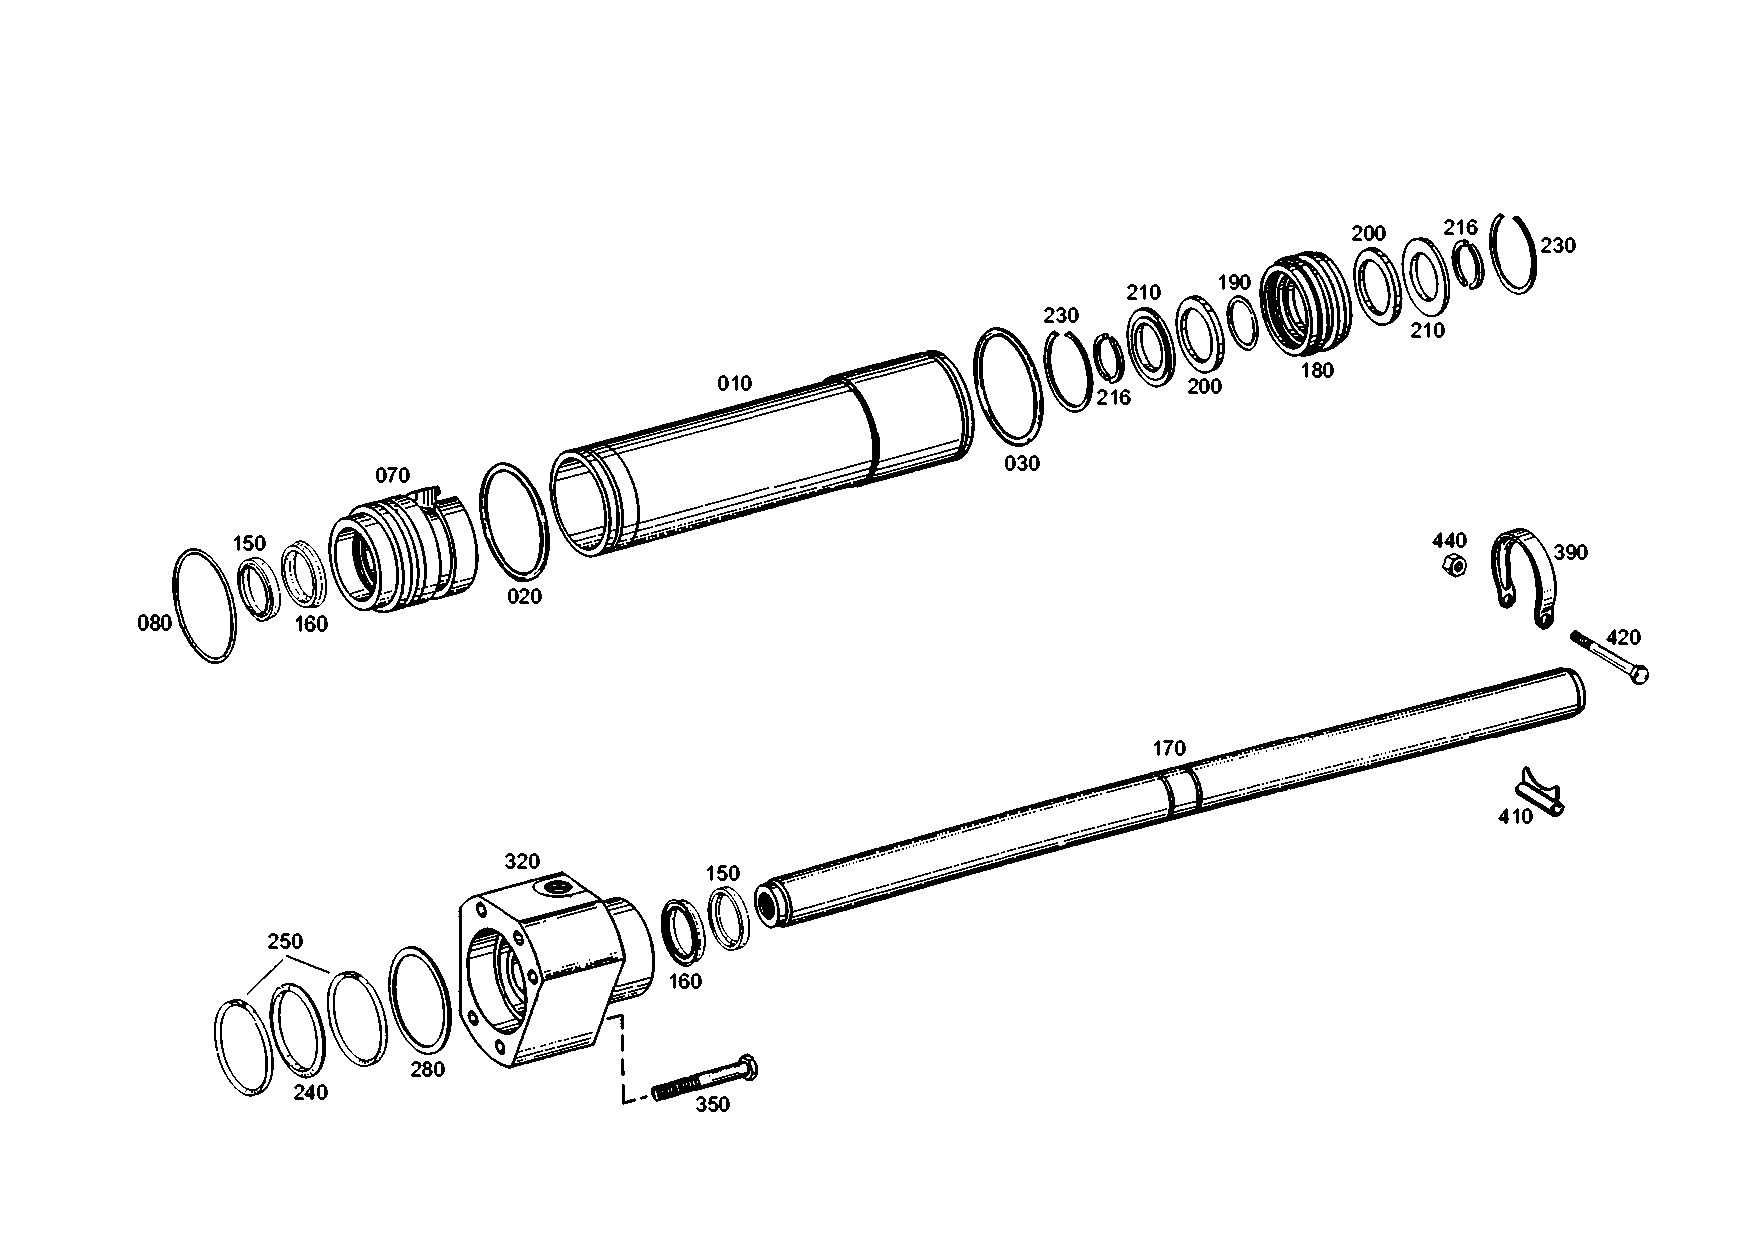 drawing for TEREX EQUIPMENT LIMITED 0530300 - SCRAPER RING (figure 1)